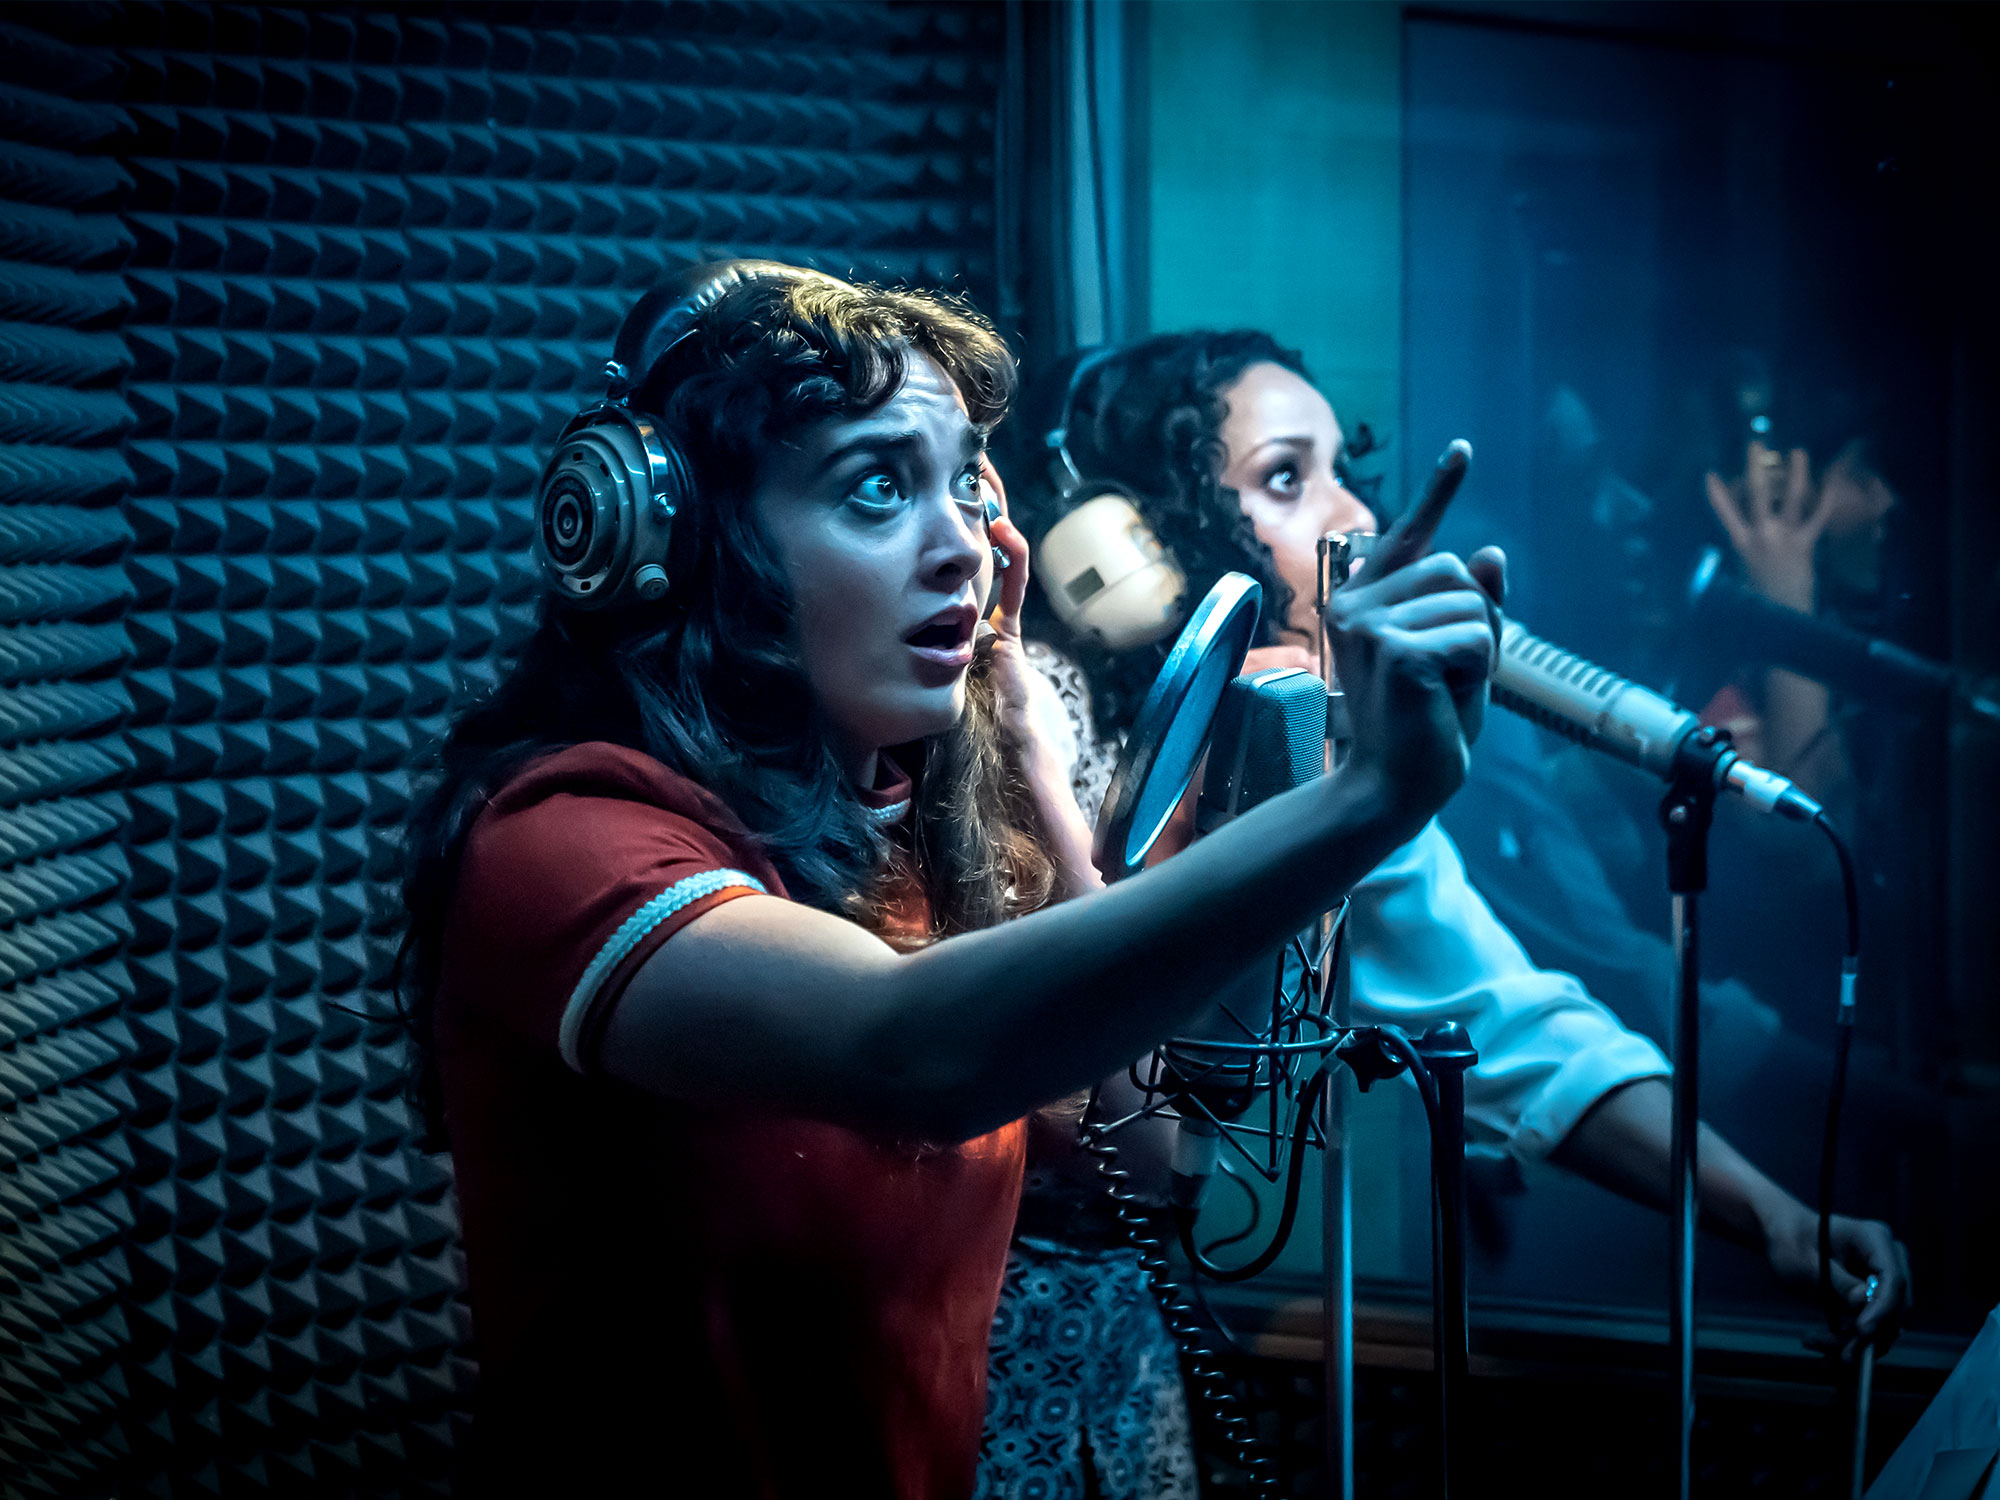 A new Berberian Sound Studio adaptation brings aural chills to the stage